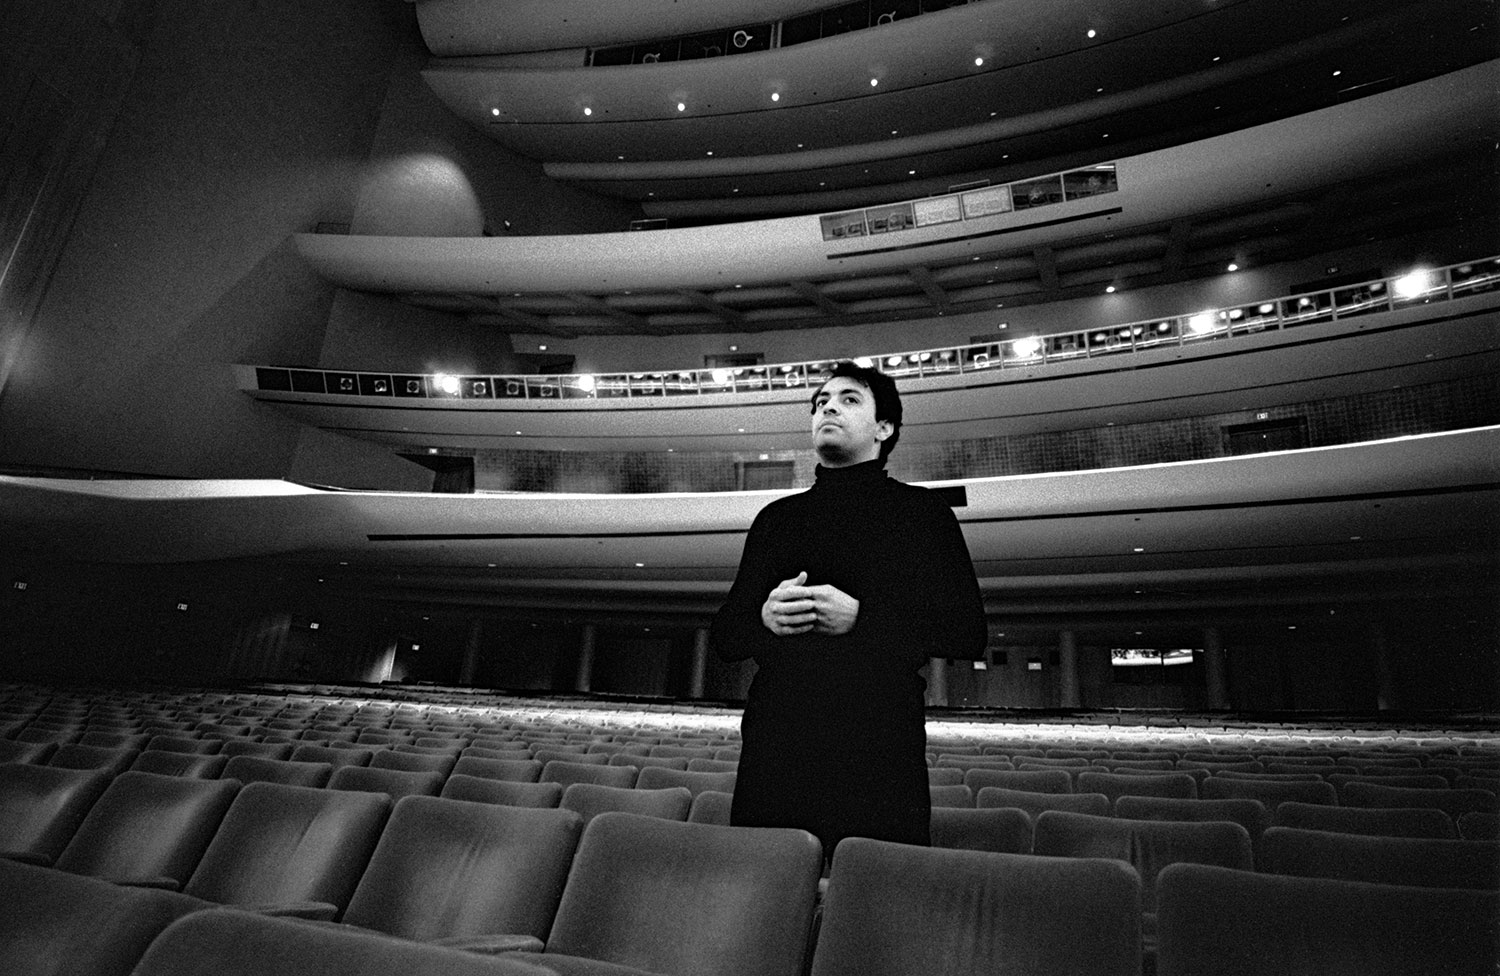  ZUBIN MEHTA   Conductor of the Los Angeles Symphony Orchestra preparing for the opening concert at the Dorothy Chandler Pavilion, 1964  